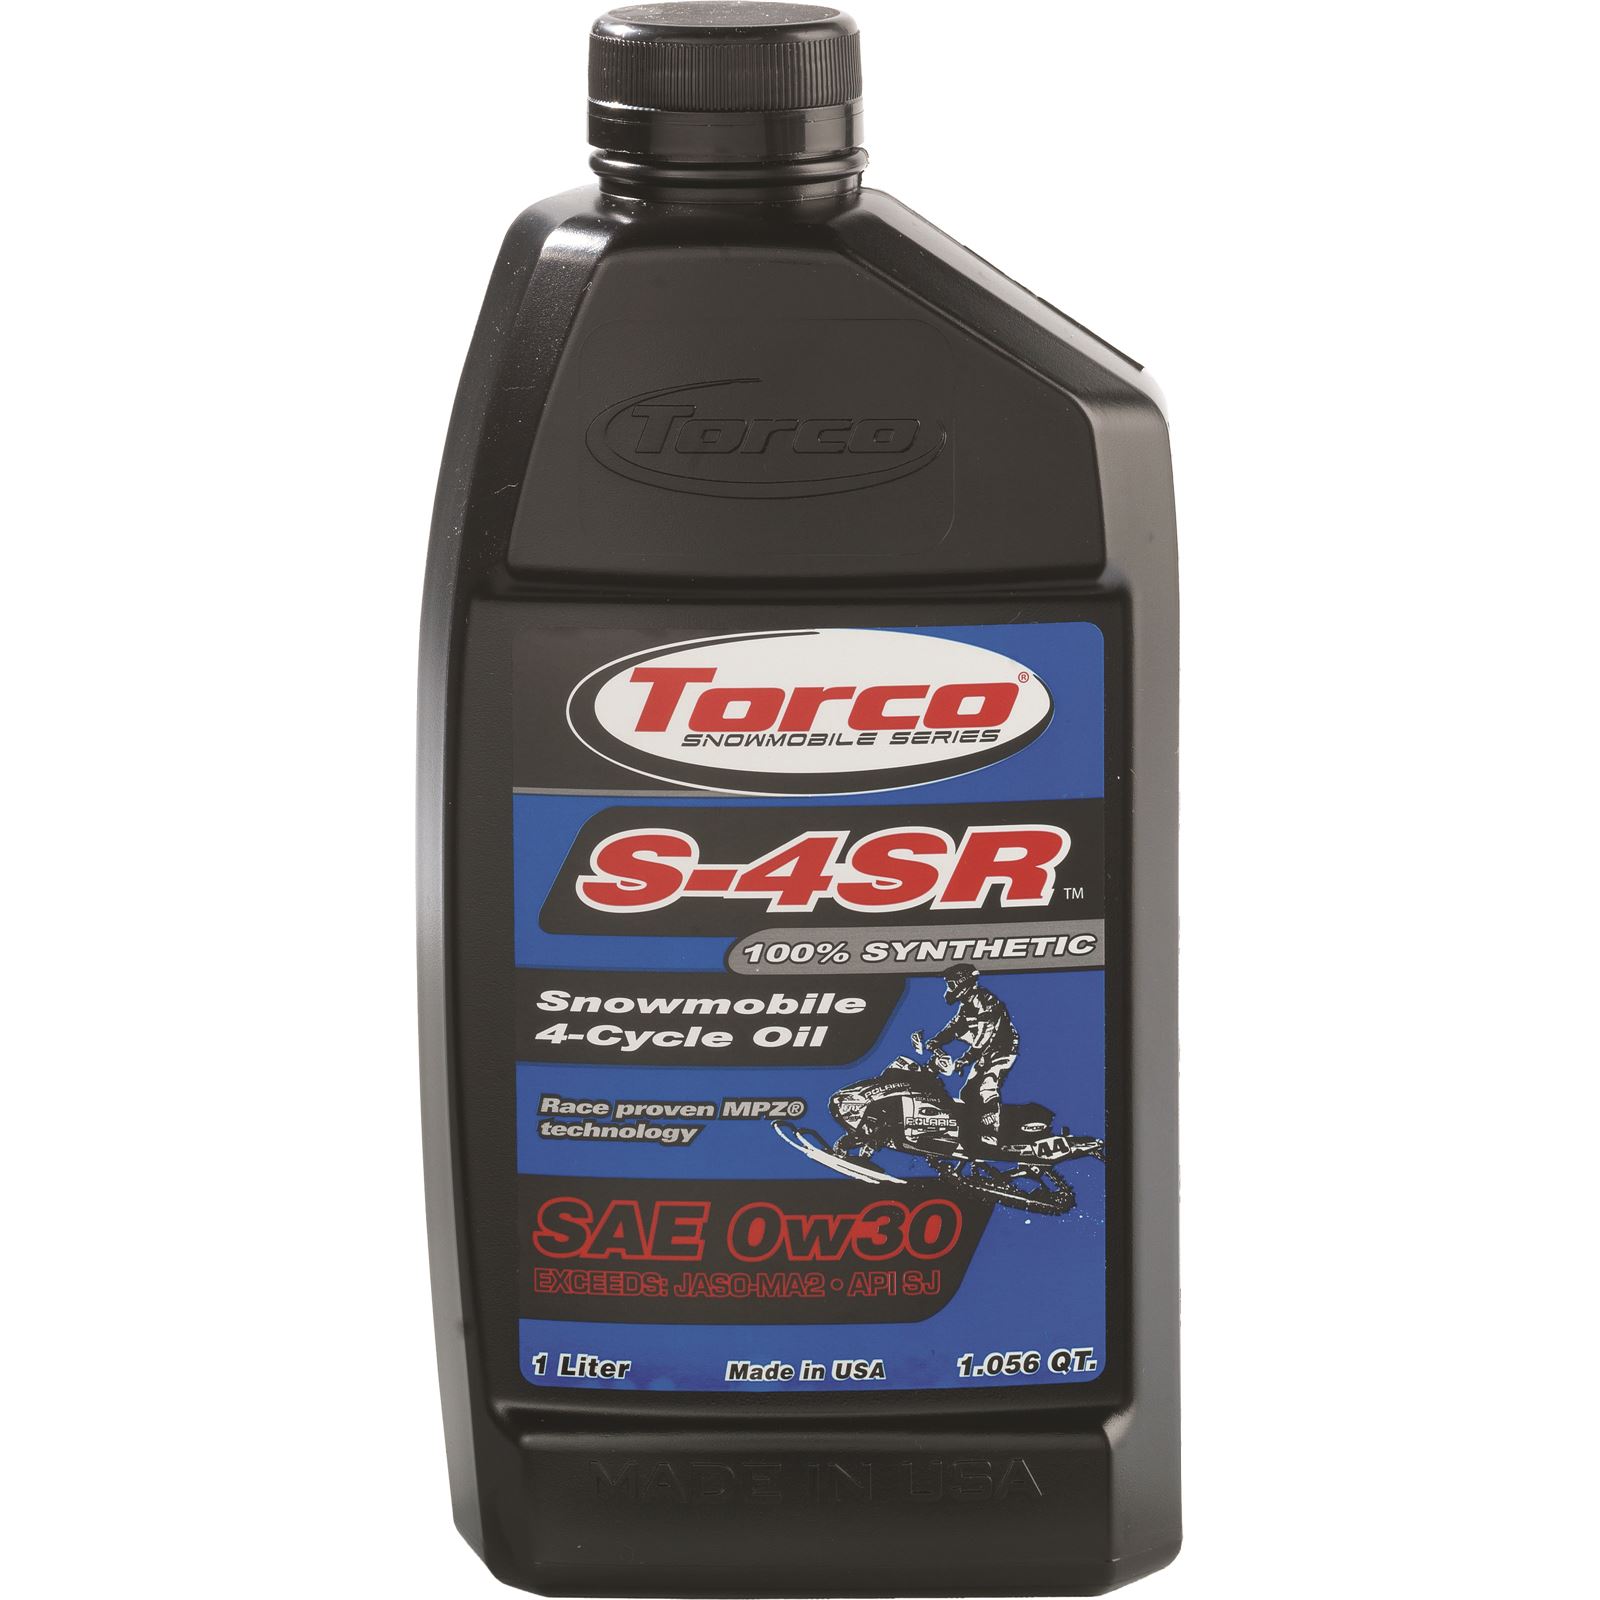 Torco S-4SR 100% Synthetic 4-Cycle Lubrication